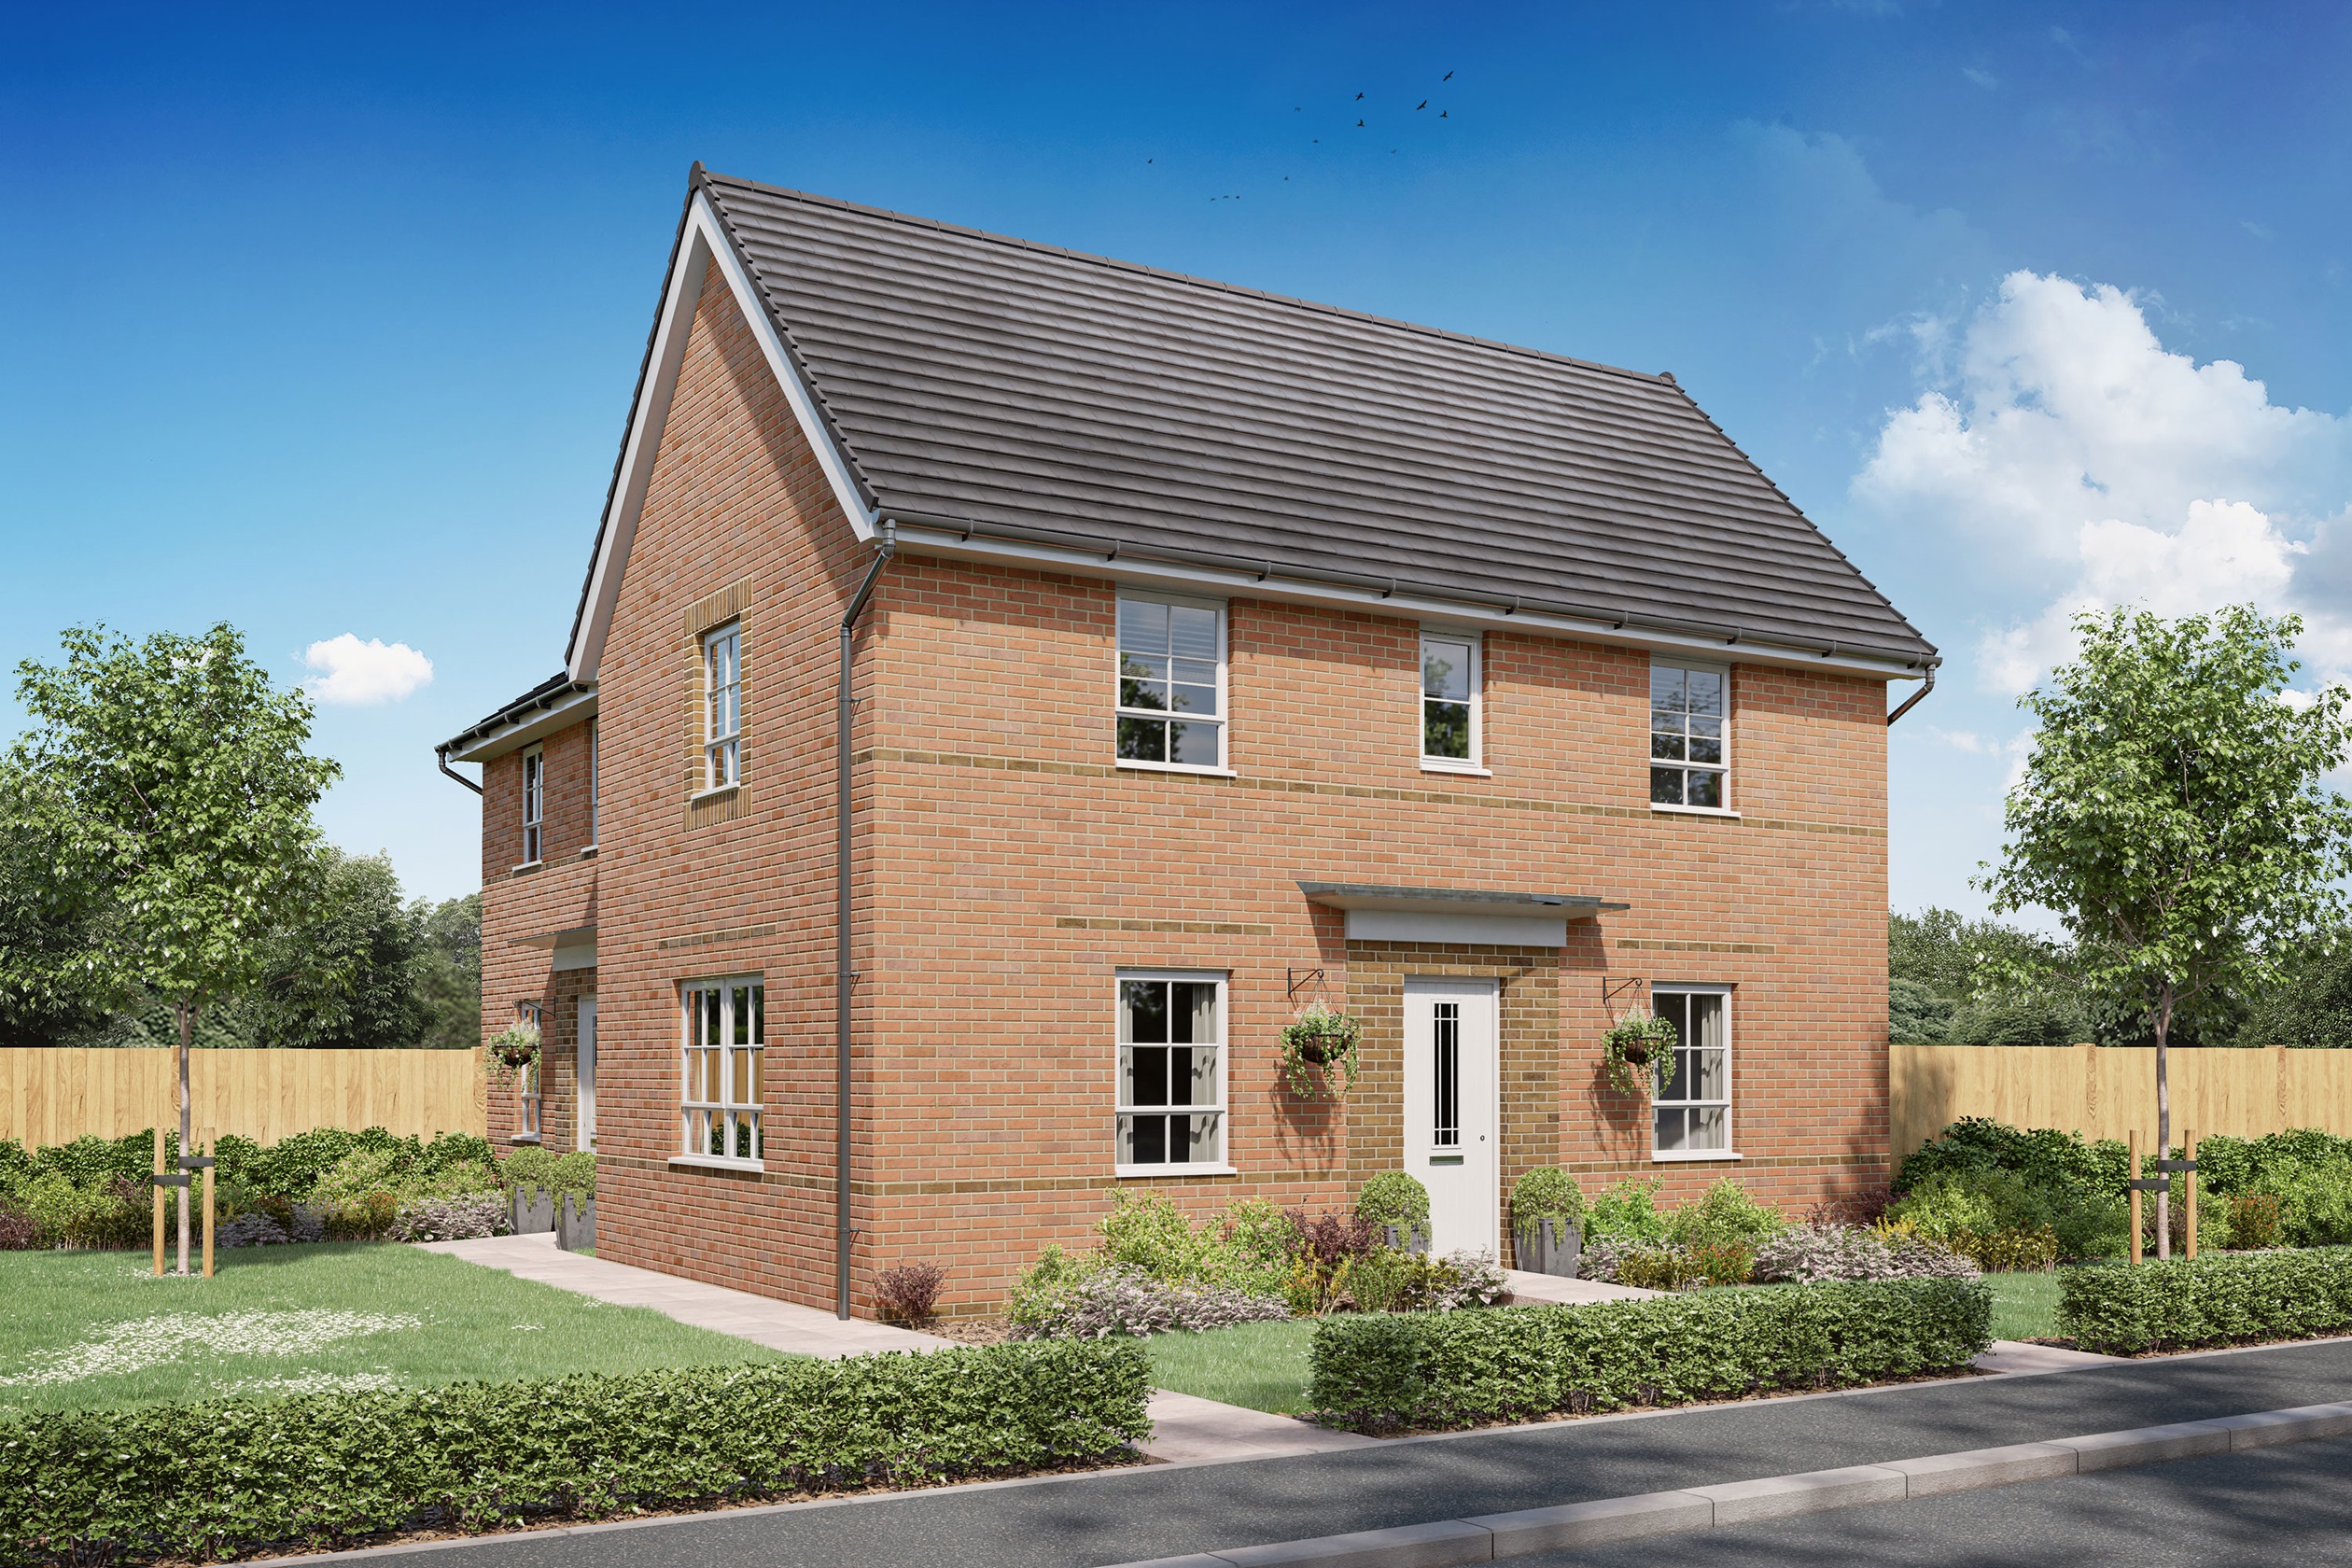 Property 1 of 8. Exterior CGI View Of Our 3 Bed Moresby Home